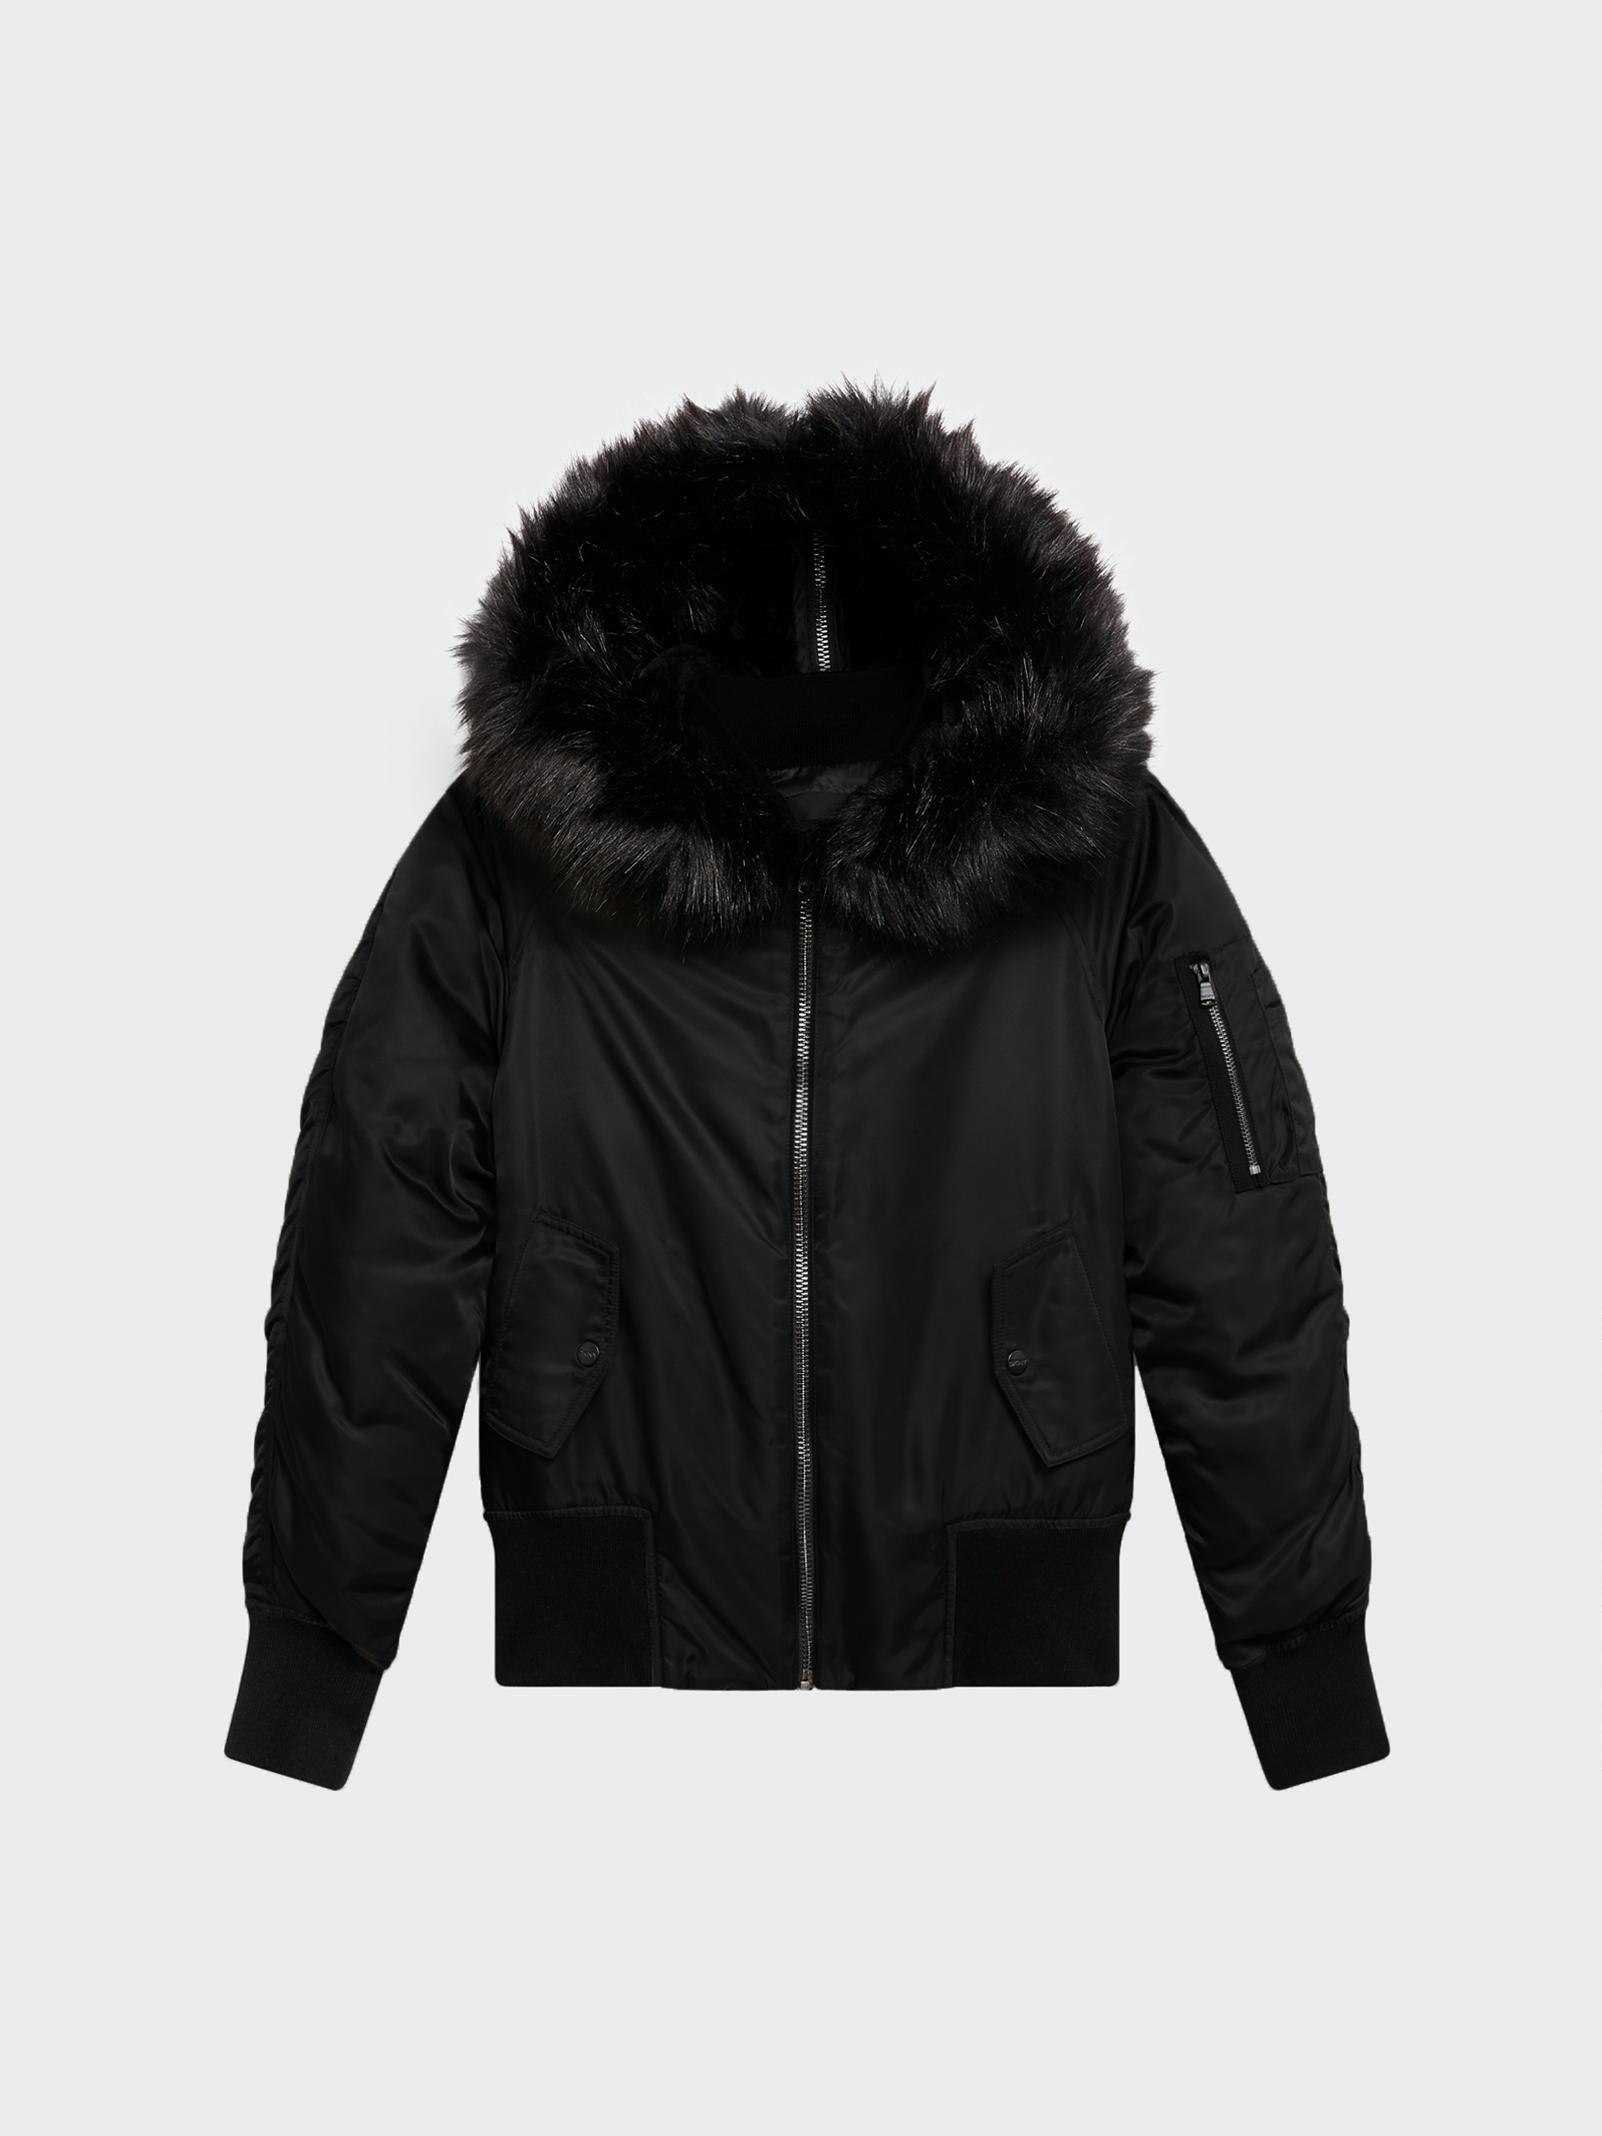 Dkny Nylon Twill Down Bomber With Faux Fur Hood In Black Lyst